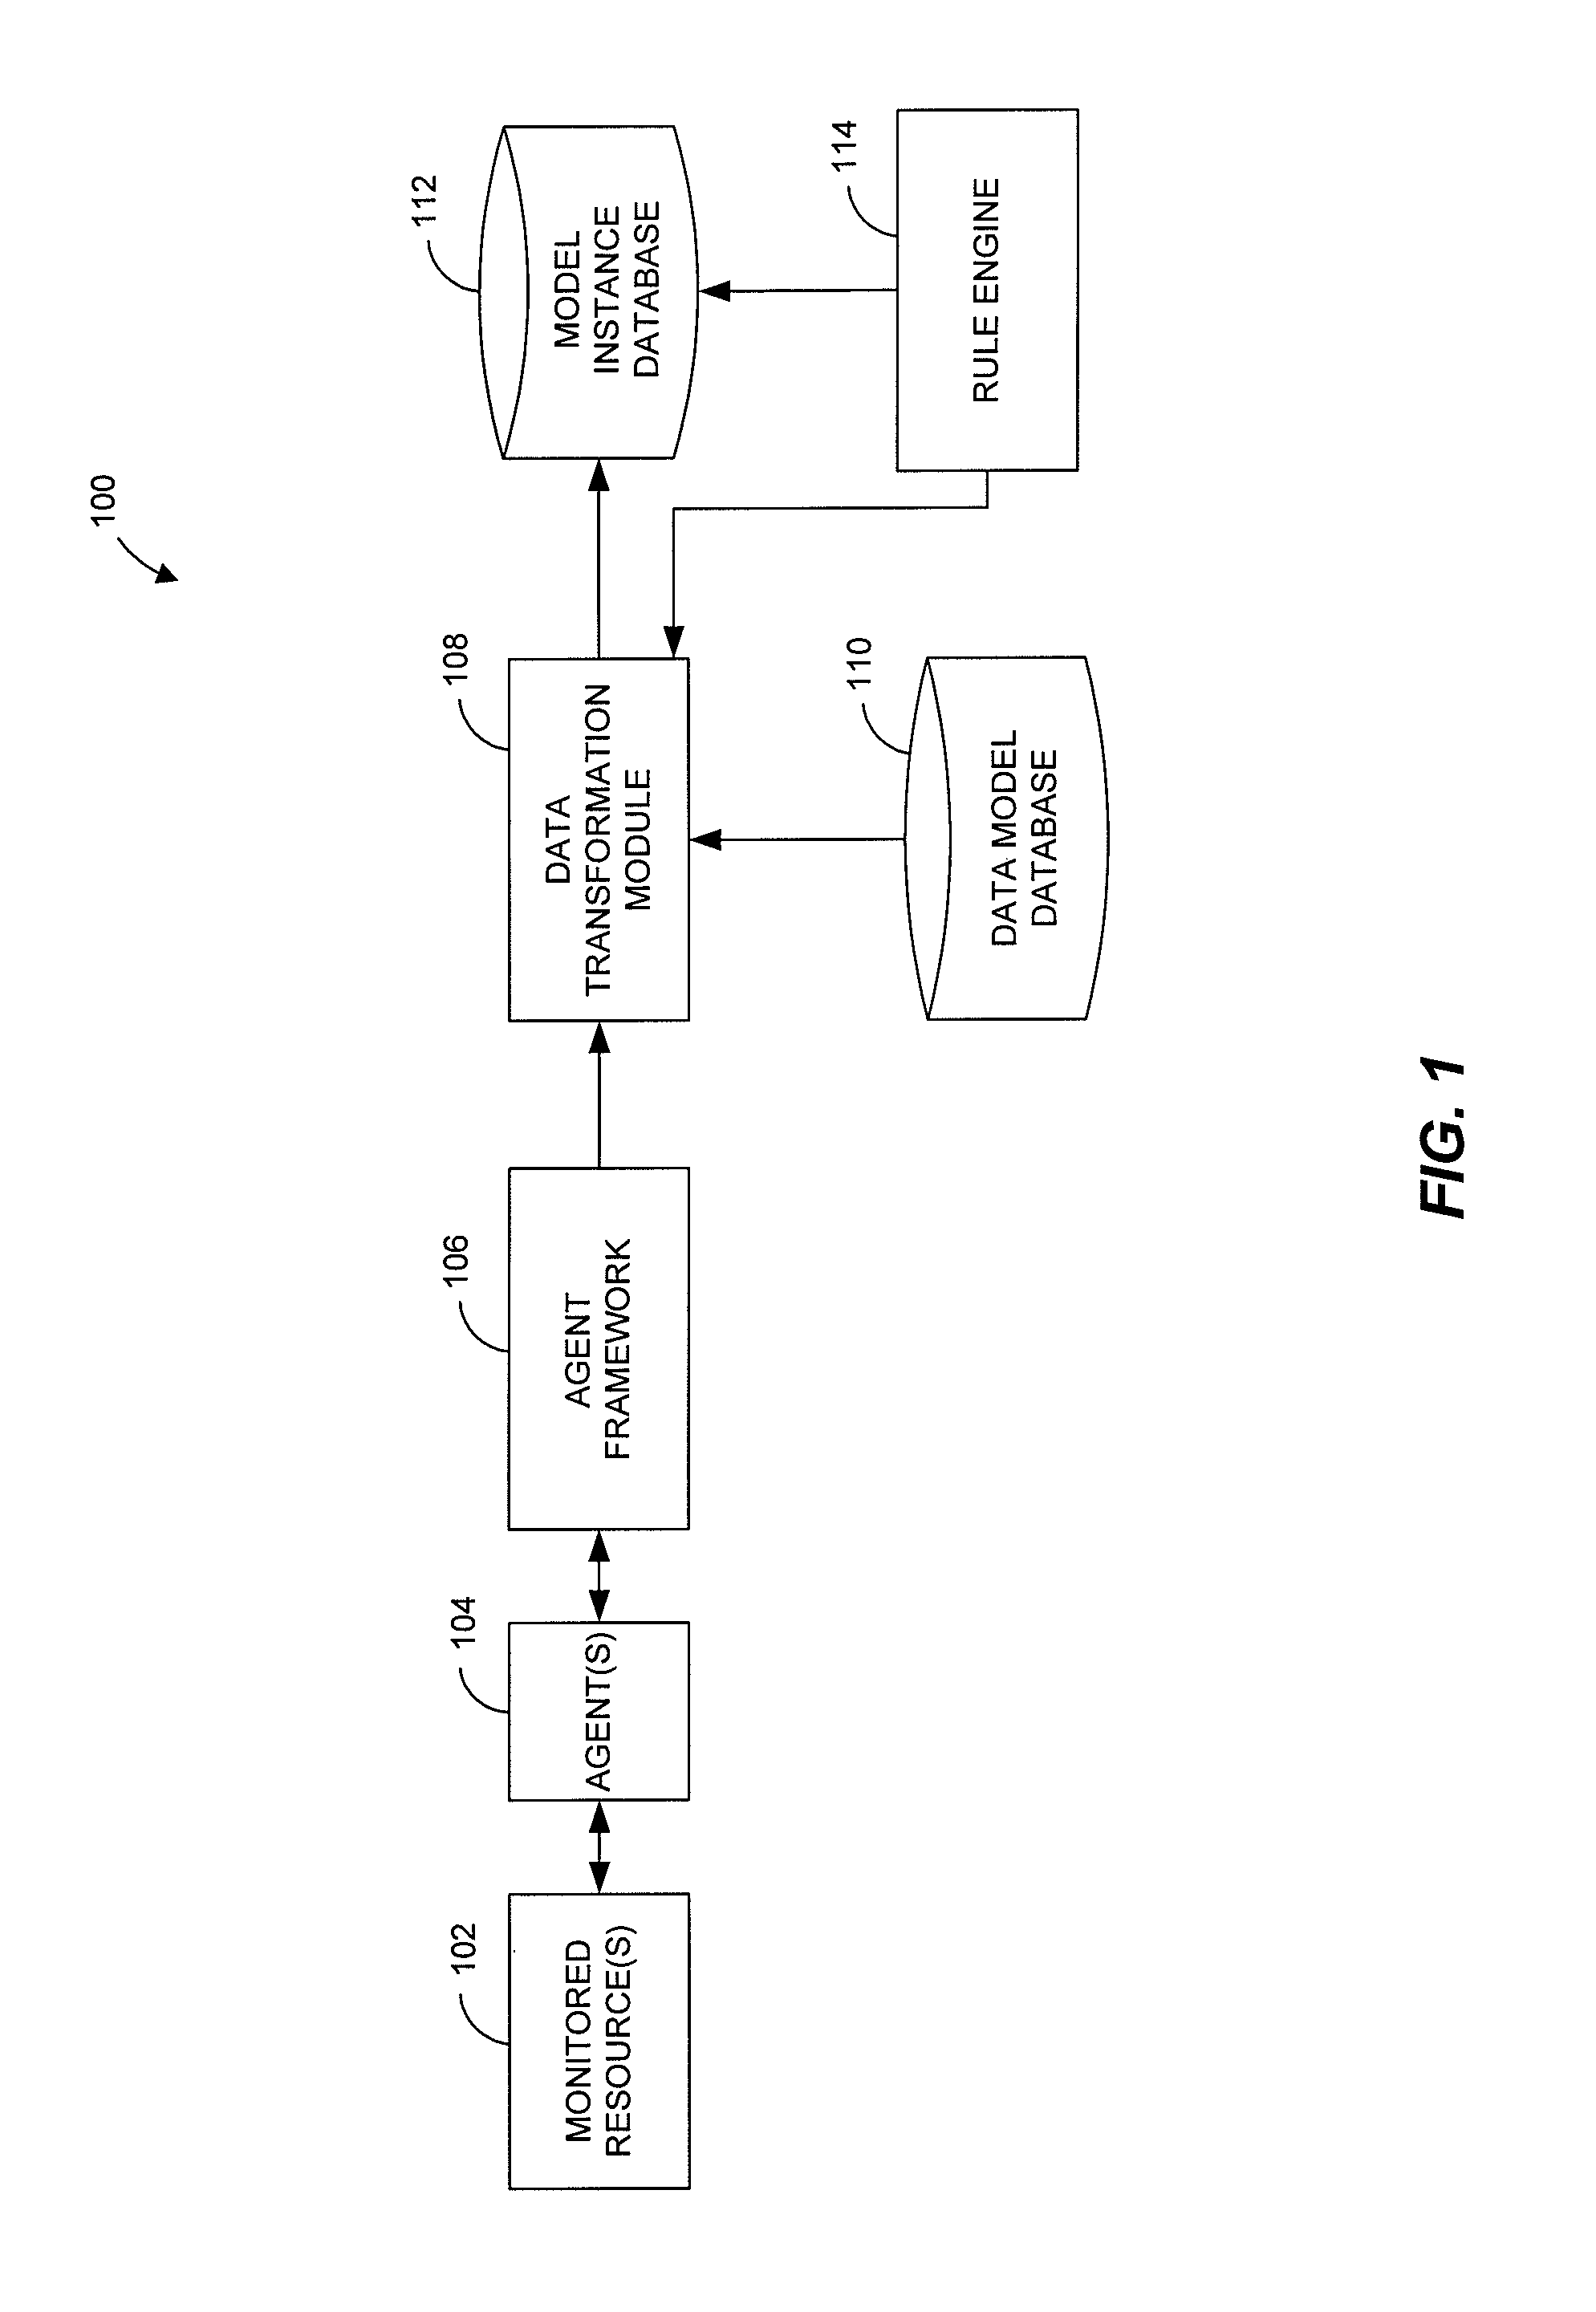 Model-based systems and methods for monitoring computing resource performance